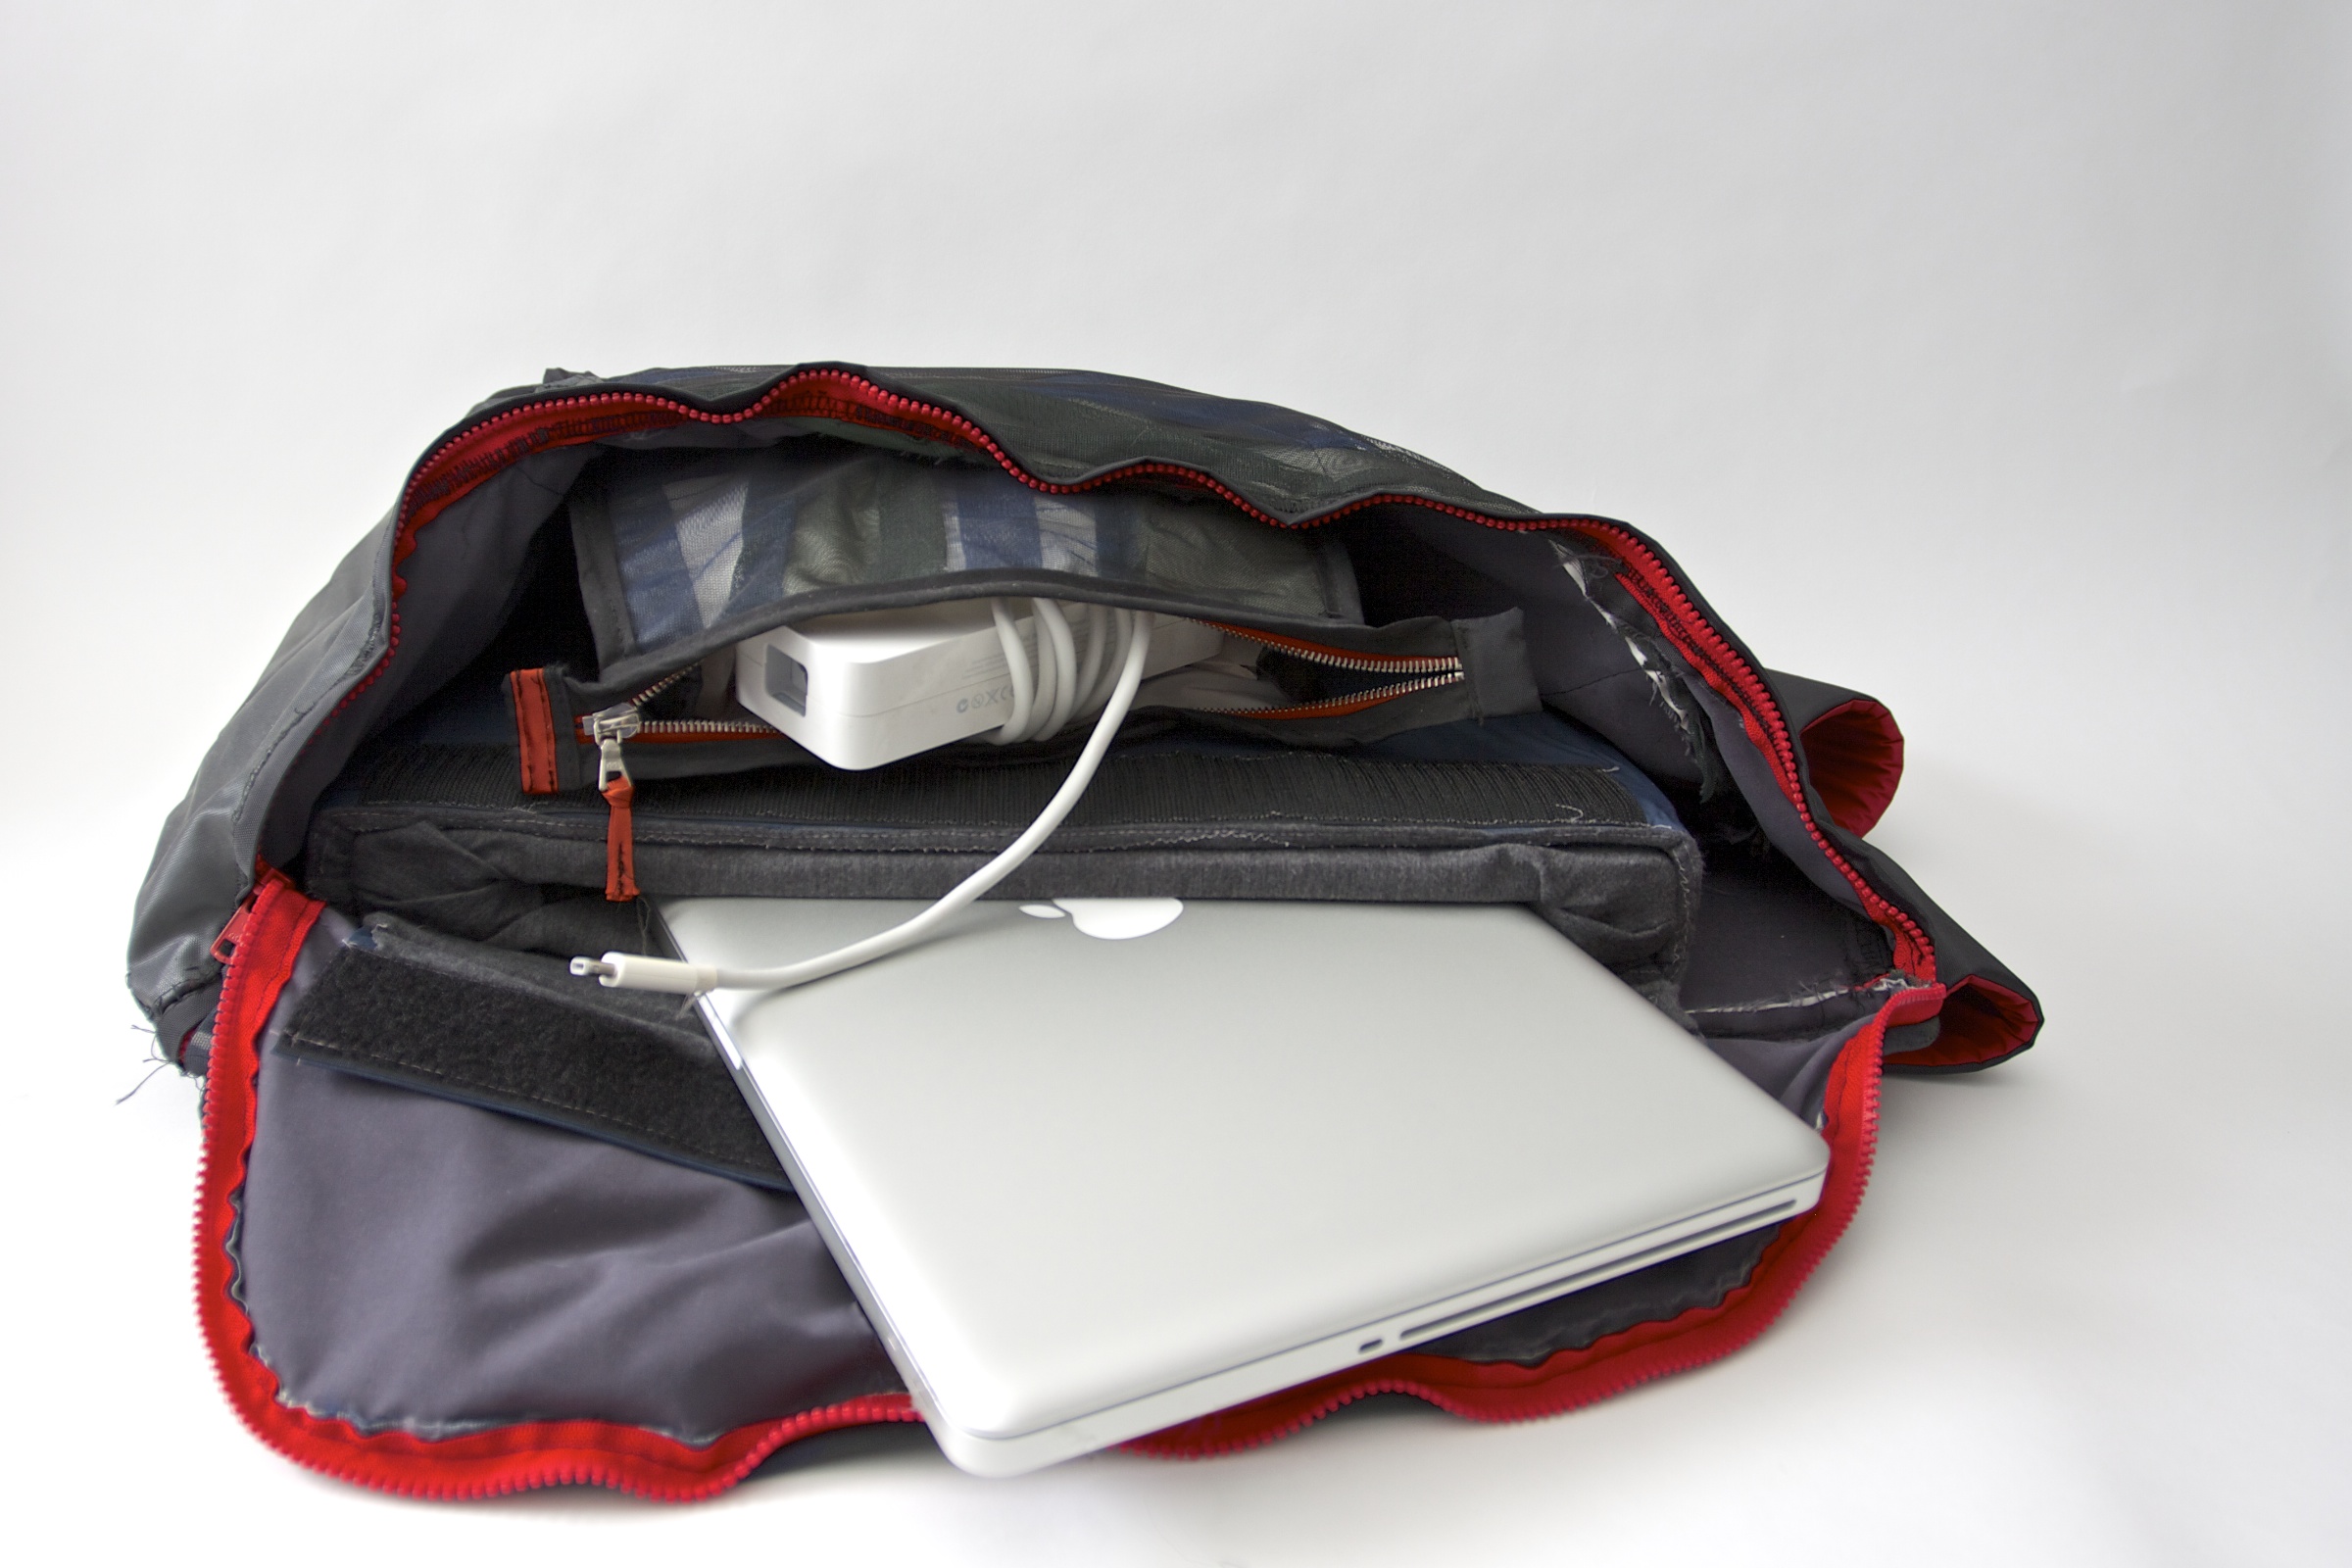  Bag open with laptop and accessories 